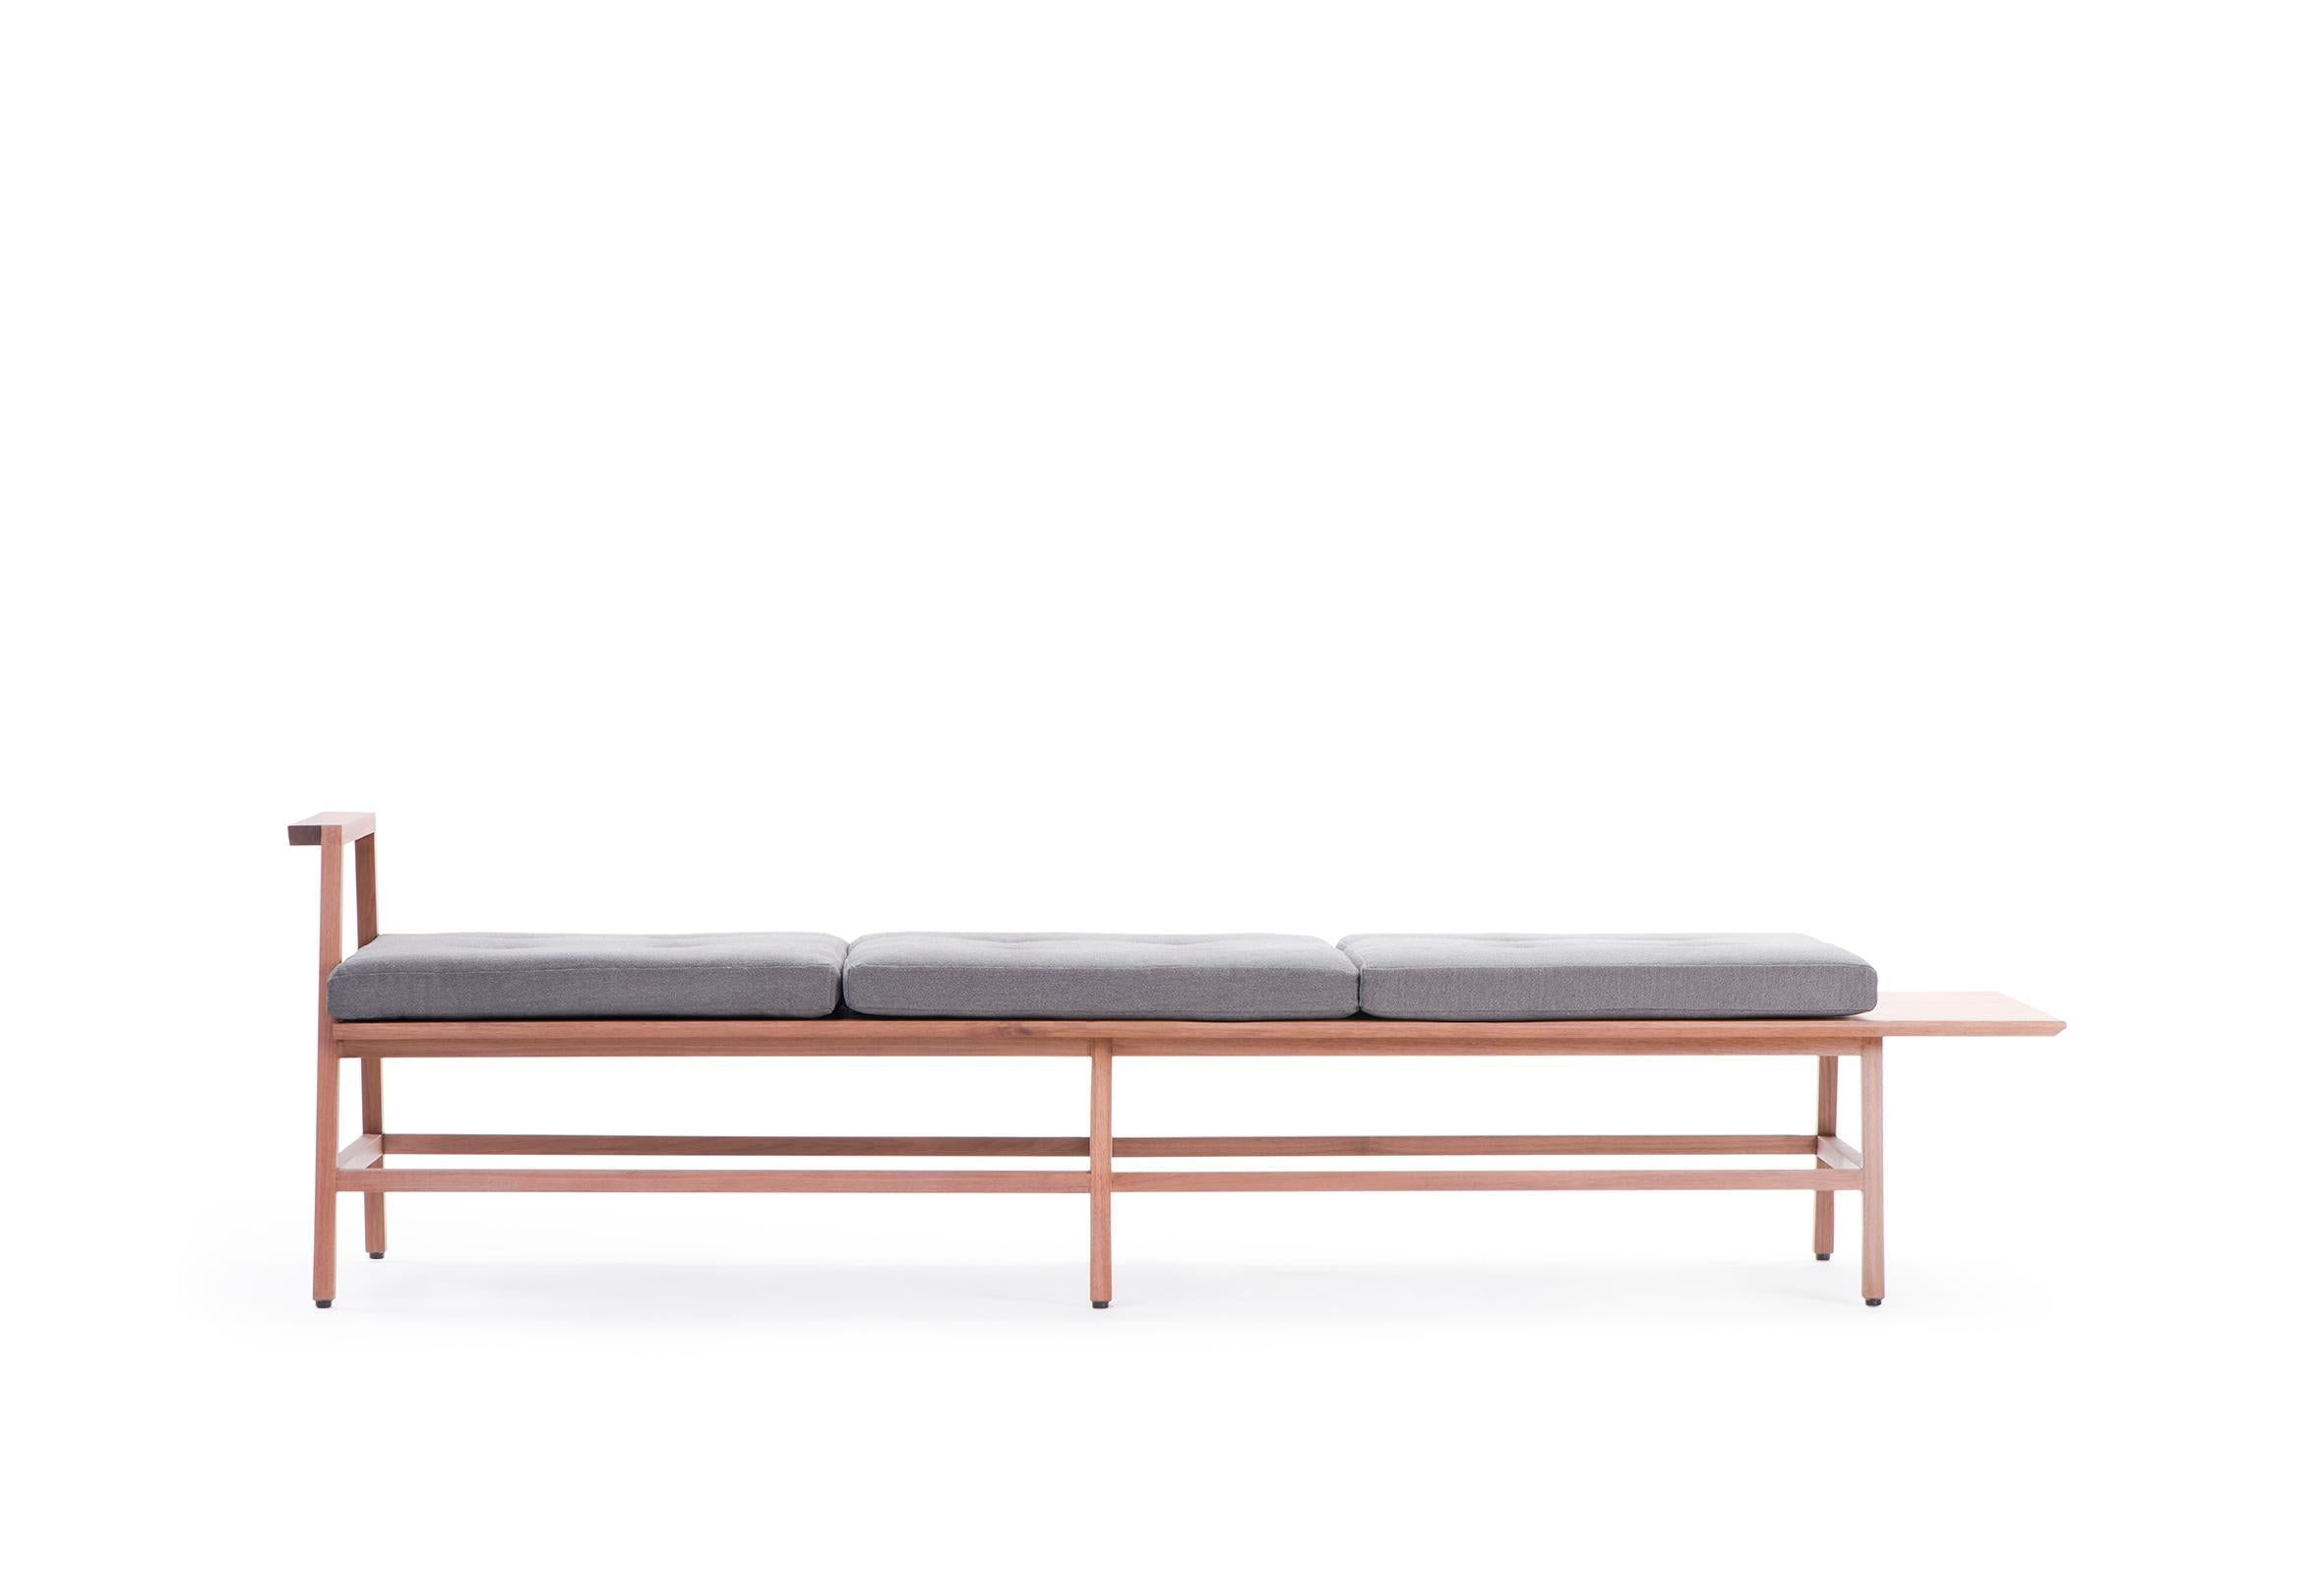 Hand-Crafted Banca Dedo, Mexican Contemporary 3-Seat Bench by Emiliano Molina for Cuchara For Sale